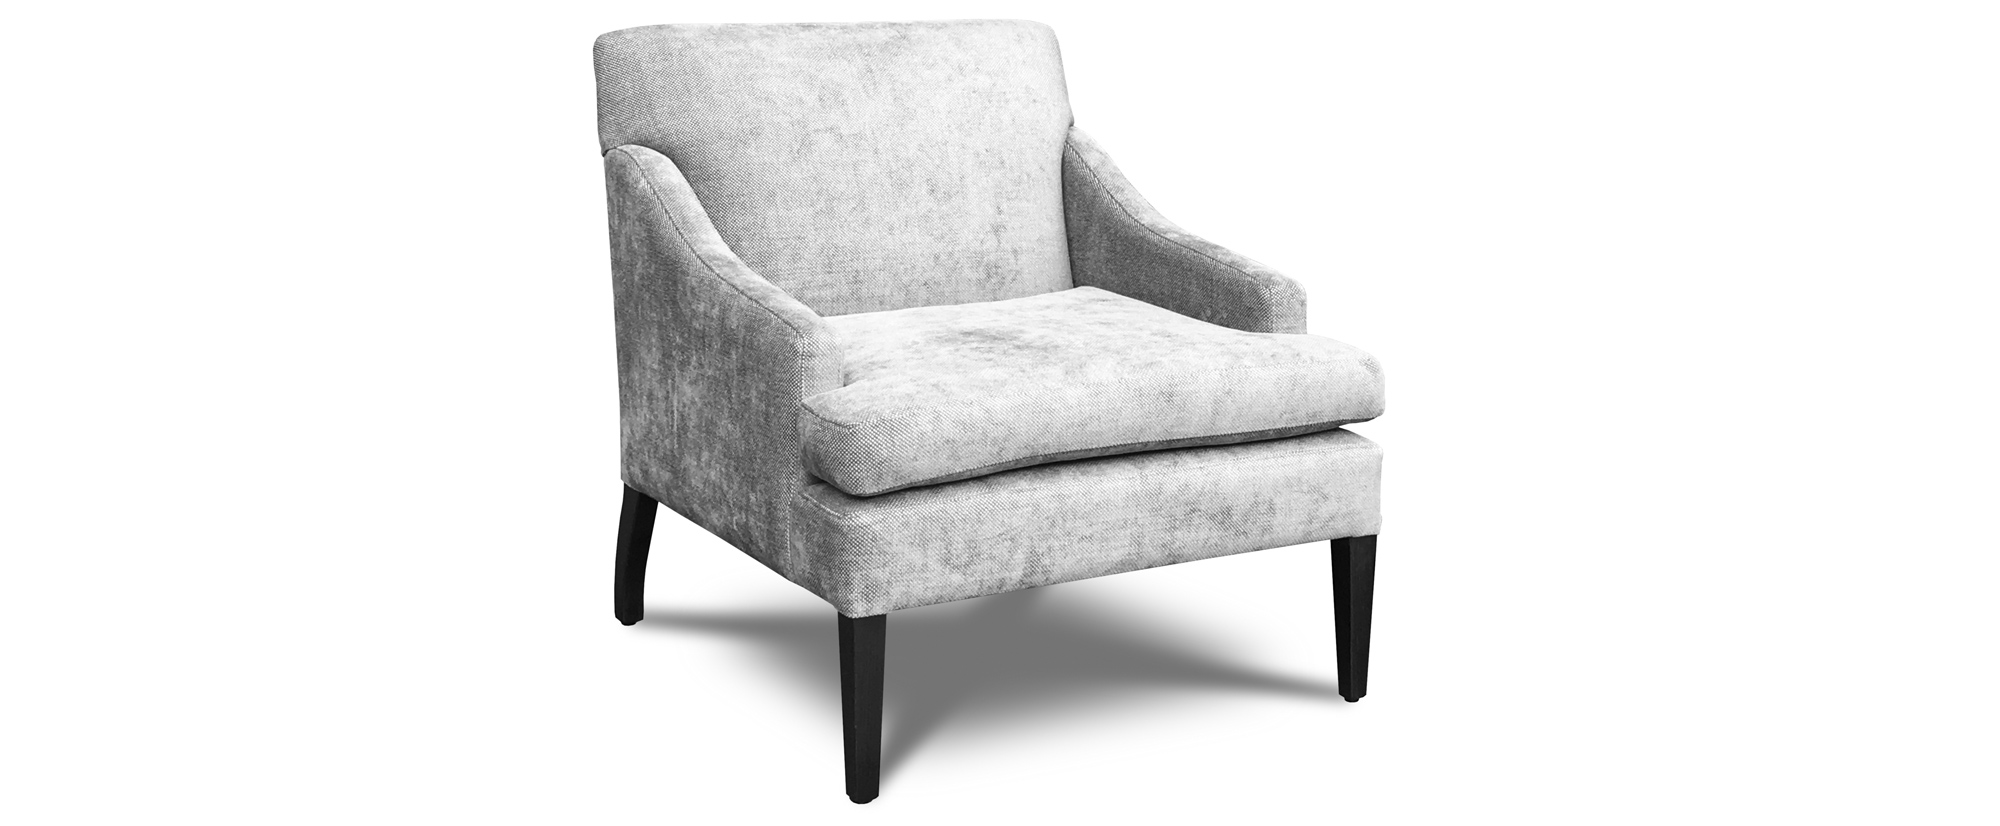 Contemporary Chairs - Milford